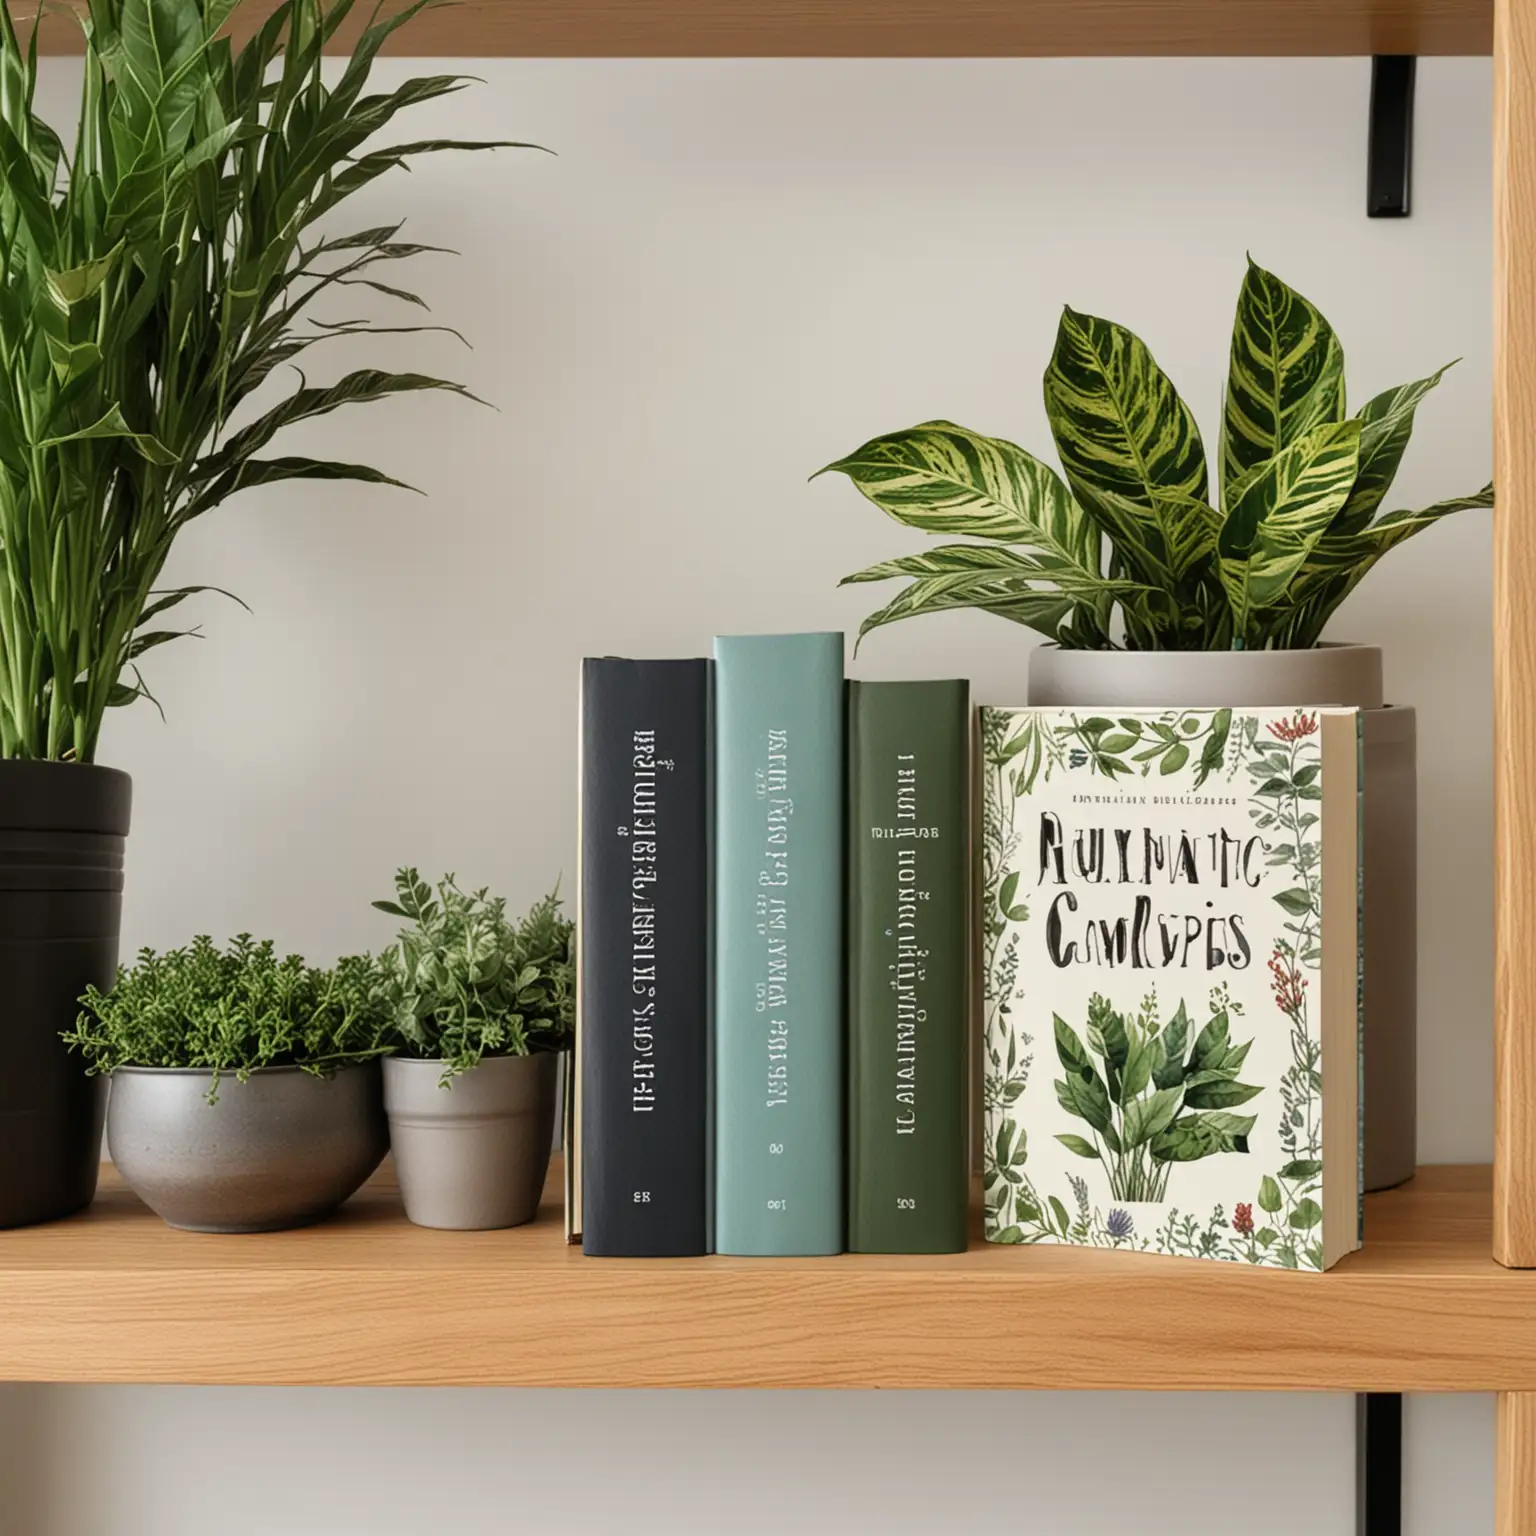 Books Displayed on Shelf with Green Plant Decor